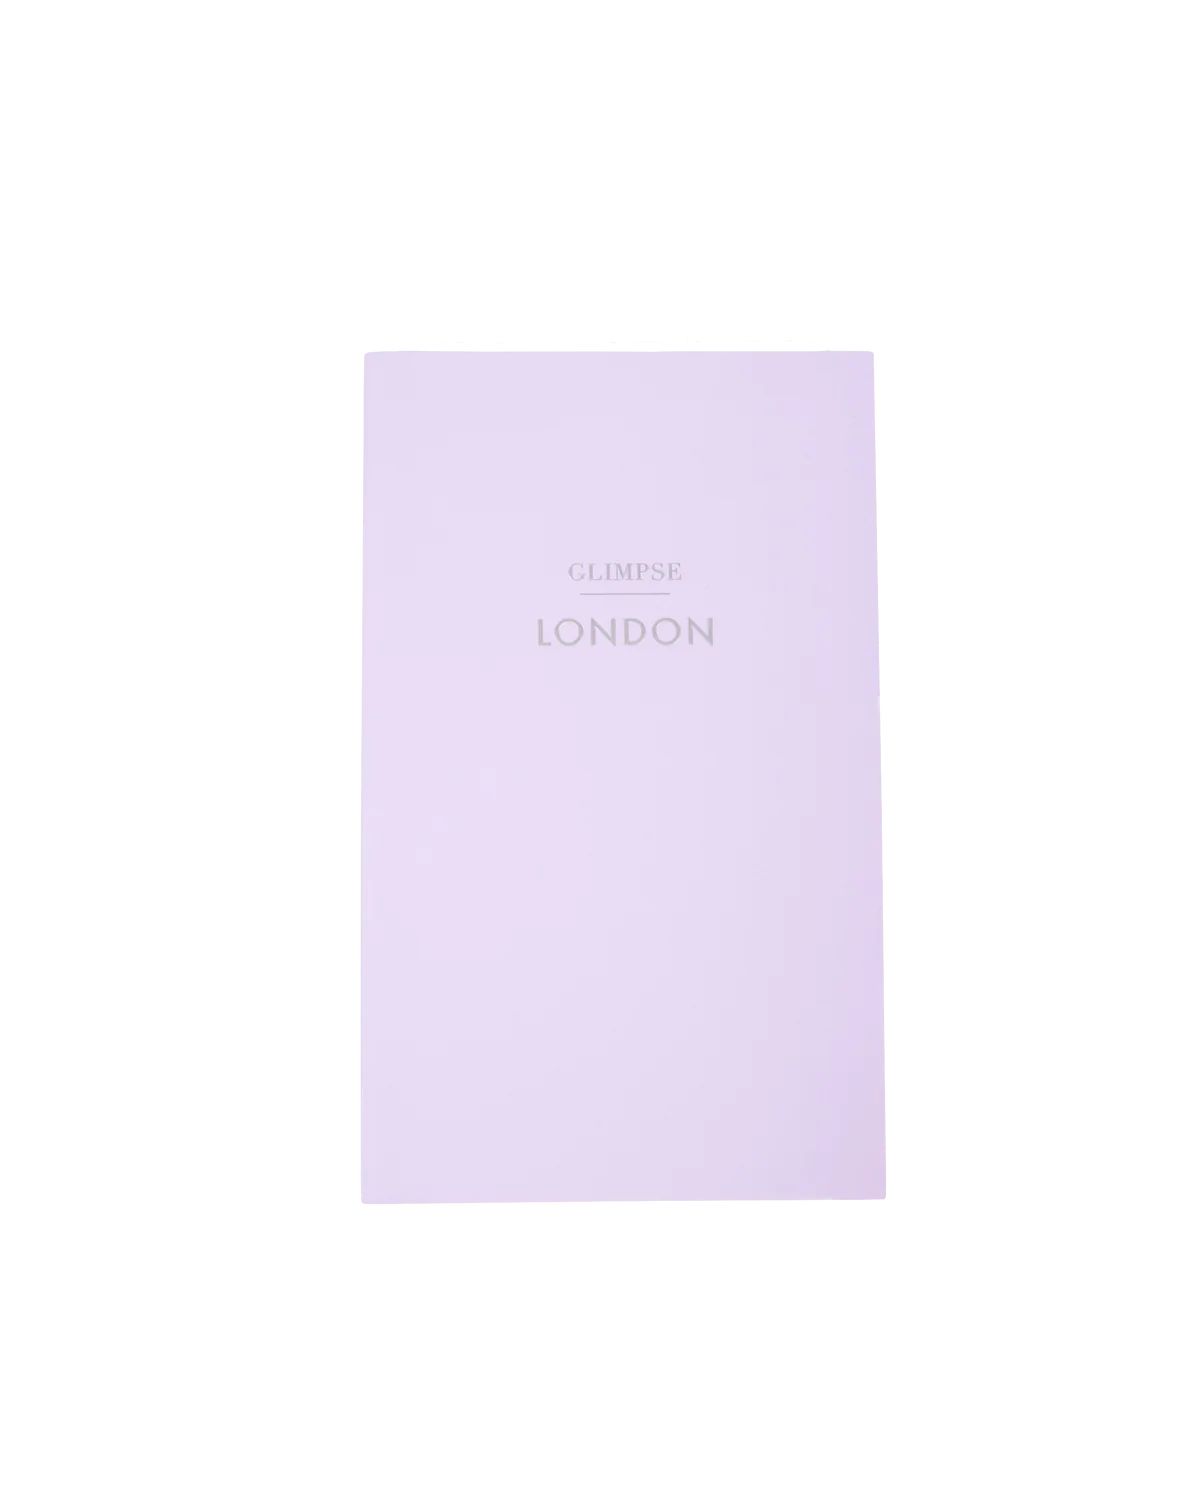 Glimpse Guide Book London | Over The Moon